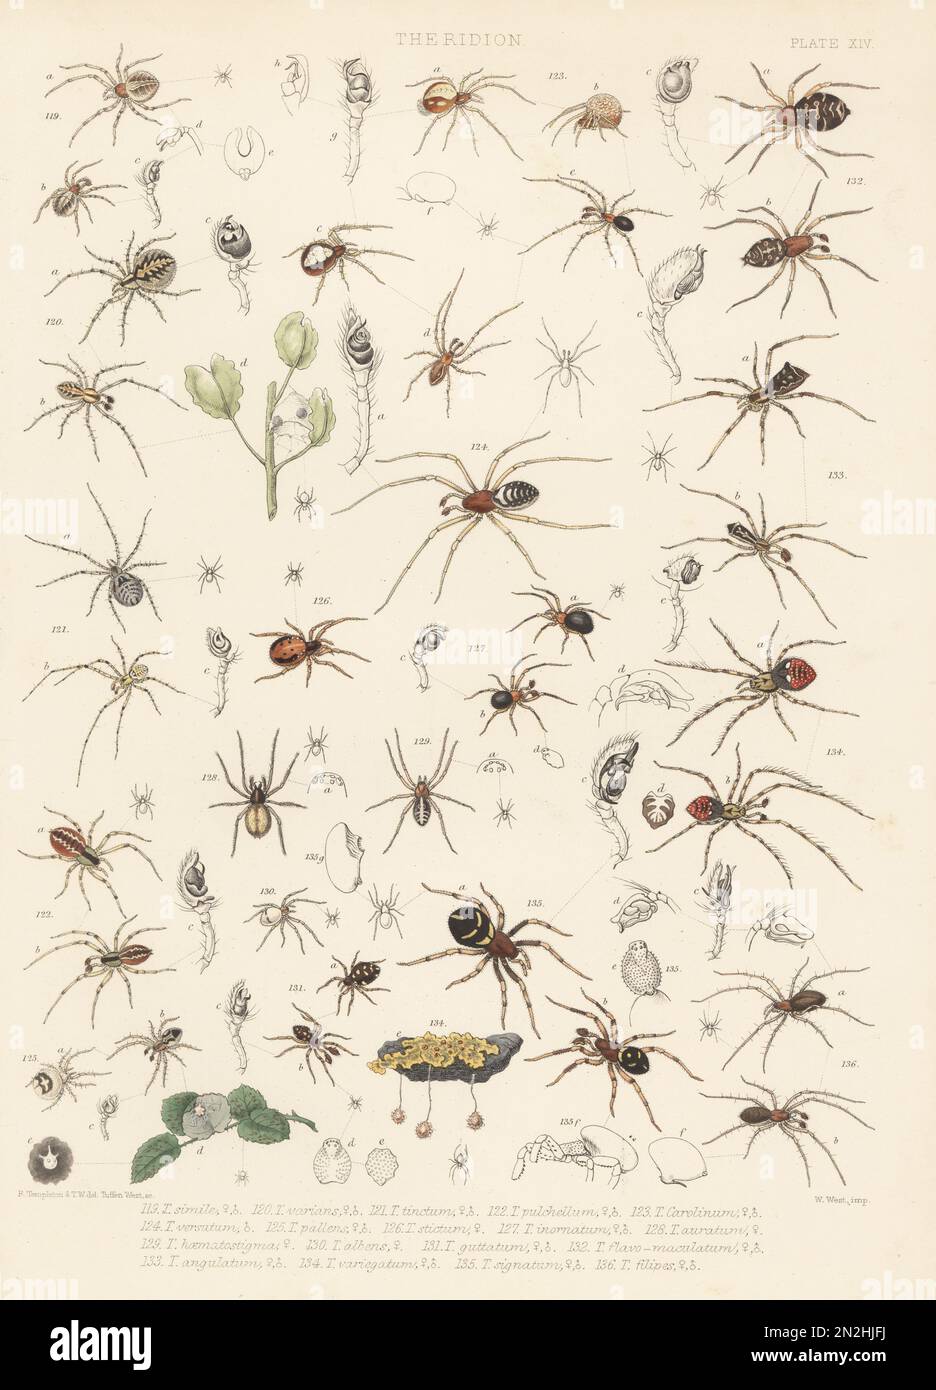 Comb-footed spider, Simitidion simile 119, cobweb spider, Theridion varians 120, Platnickina tincta 121, Anelosimus vittatus 122, Neottiura bimaculata 123, Steatoda grossa 124, Paidiscura pallens 125, 130, Crustulina sticta 126, Dipoena inornata 127, unknown Theridion species 128, 129, 134, Crustulina guttata 131, Euryopis flavomaculata 132, Episinus angulatus 133, Steatoda phalerata 135, and Diplostyla concolor 136. Handcoloured lithograph by W. West after Robert Templeton and Tuffen West from John Blackwall’s A History of the Spiders of Great Britain and Ireland, Ray Society, London, 1861. Stock Photo